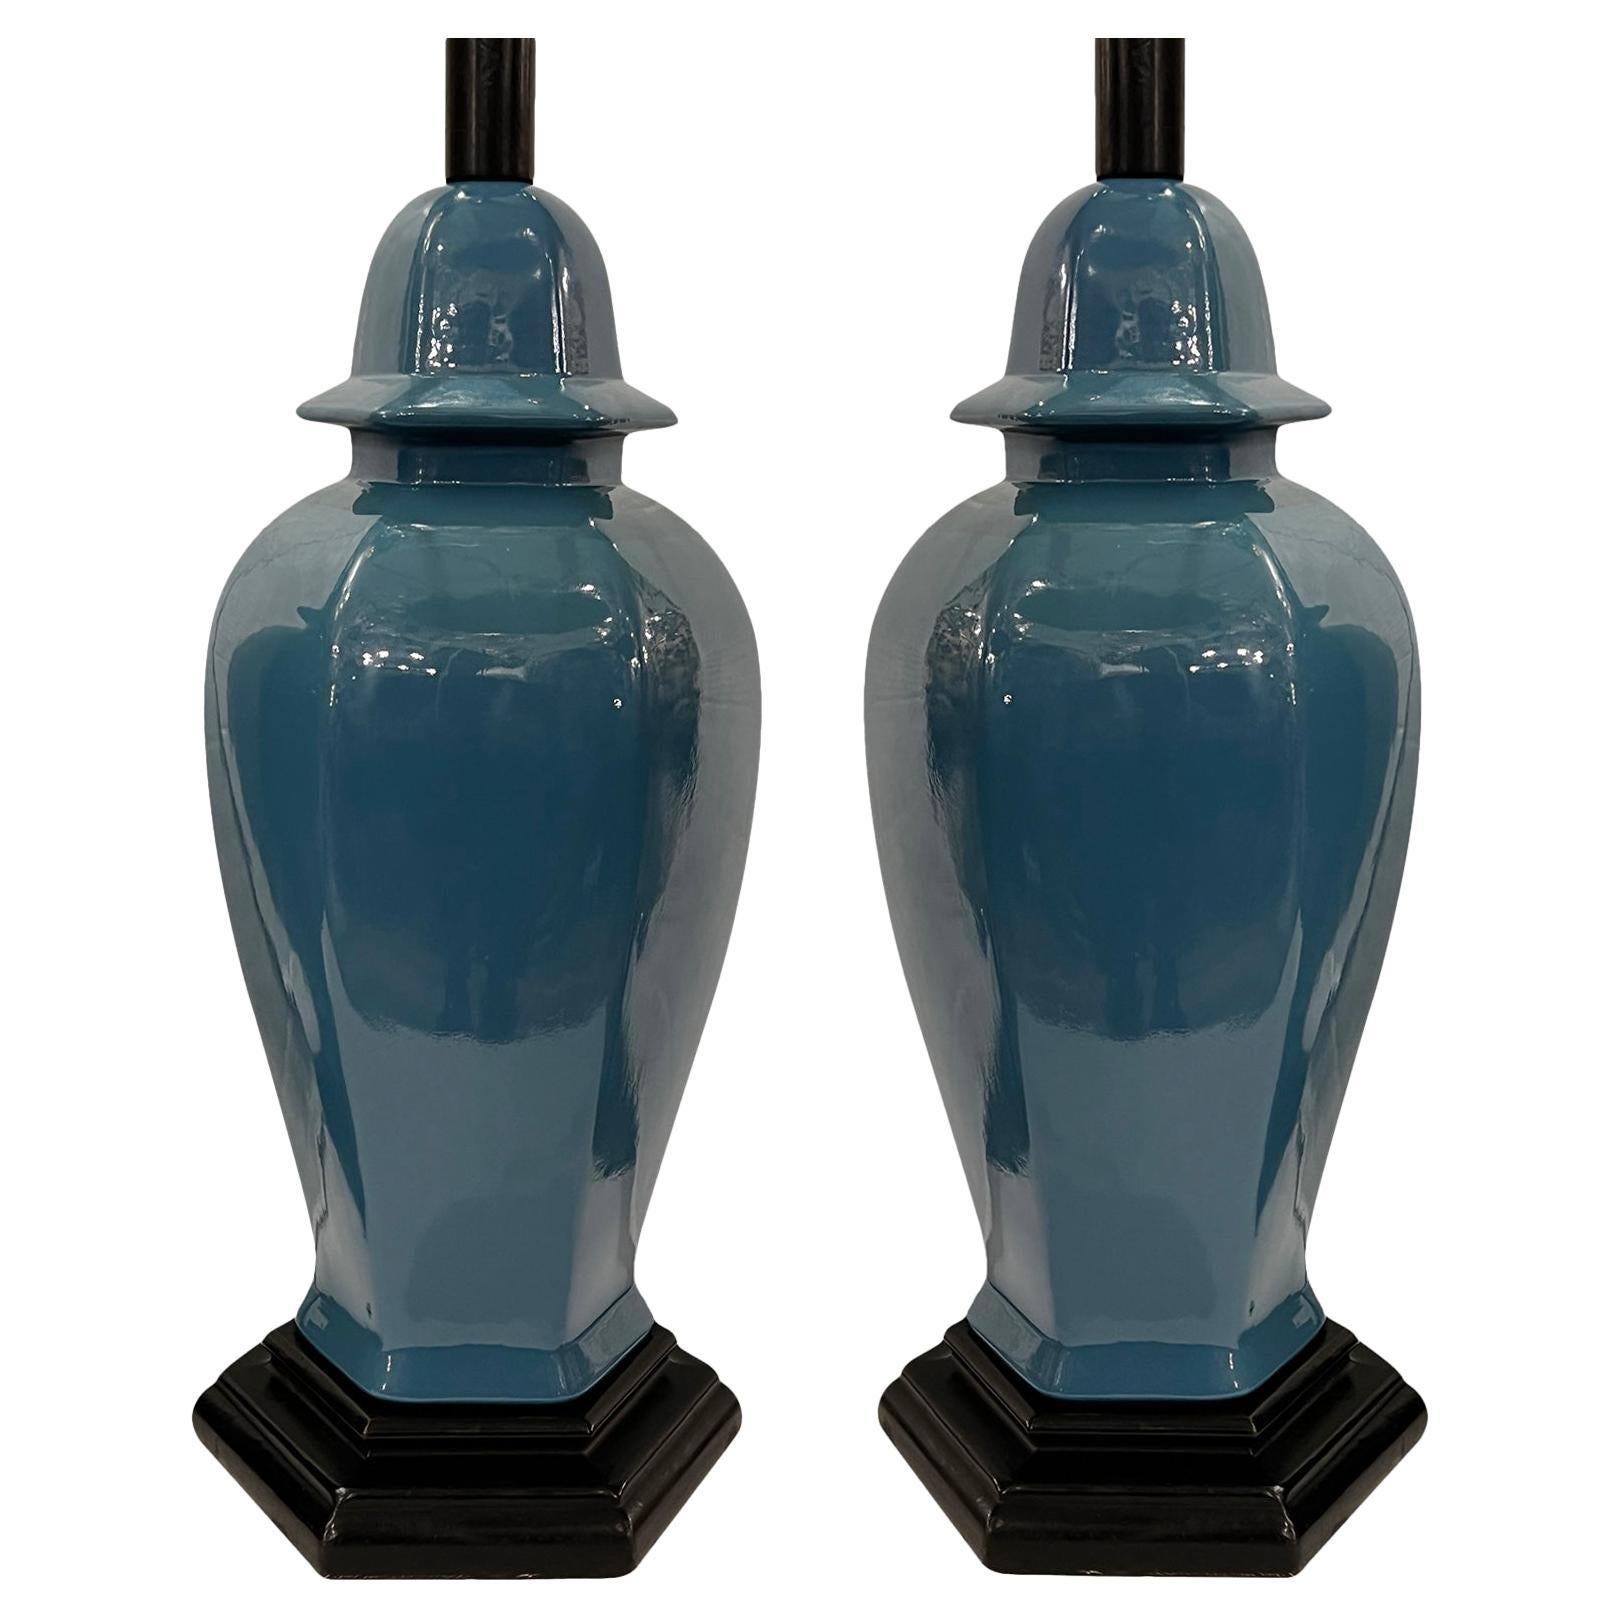 Pair of French Blue Porcelain Lamps For Sale